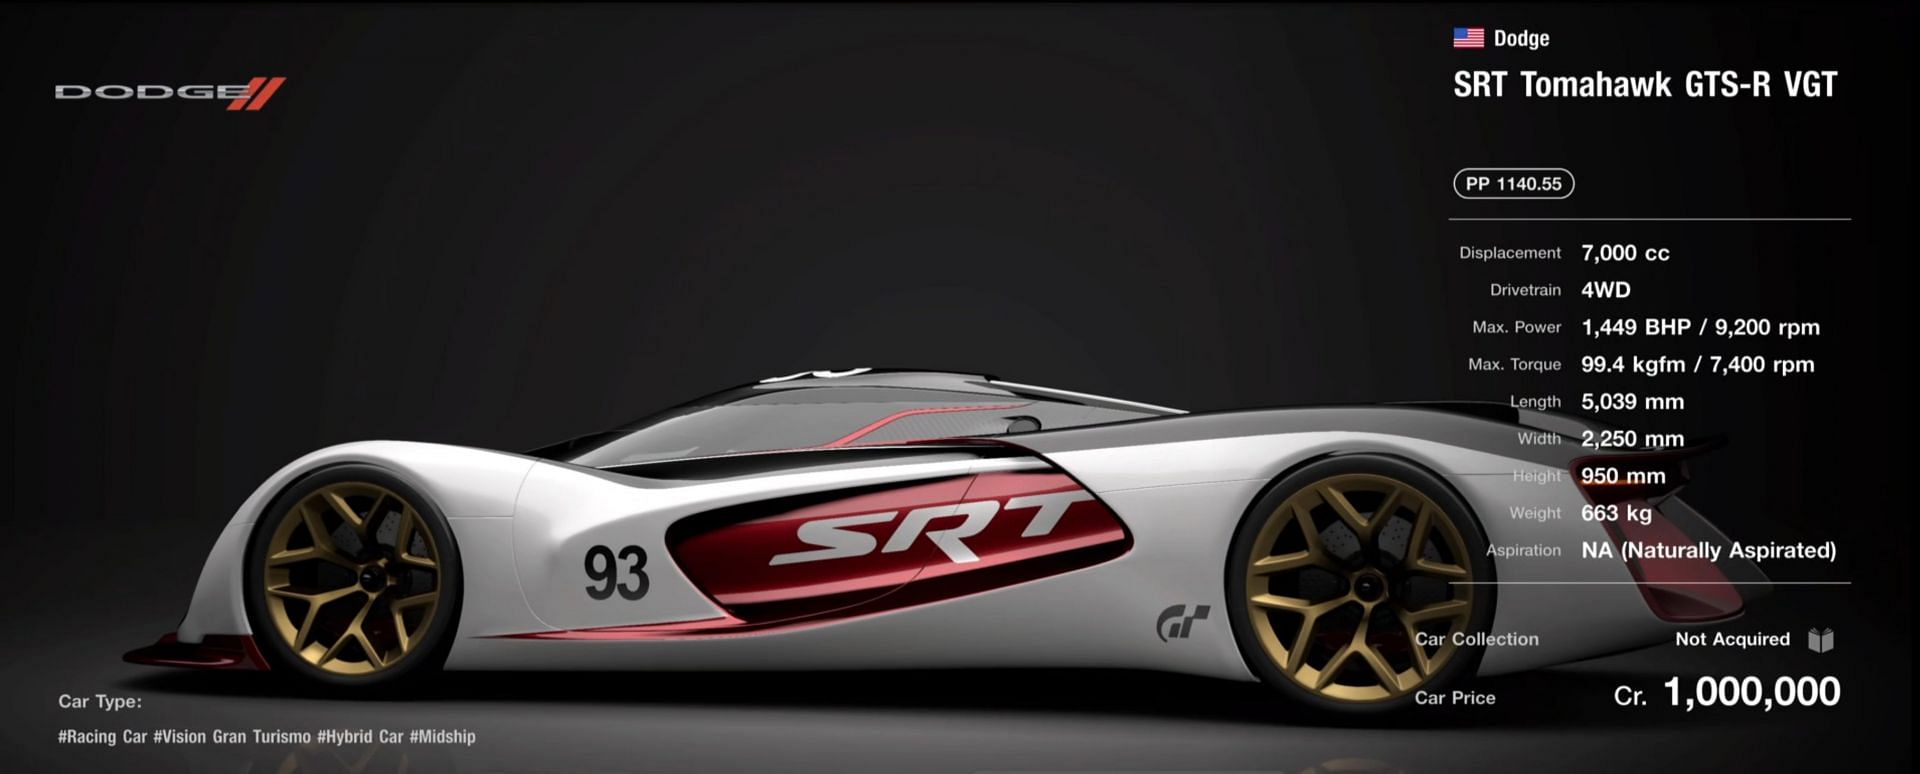 Dodge returns to the list again with its SRT line, with the SRT Tomahawk (Image via Sony)